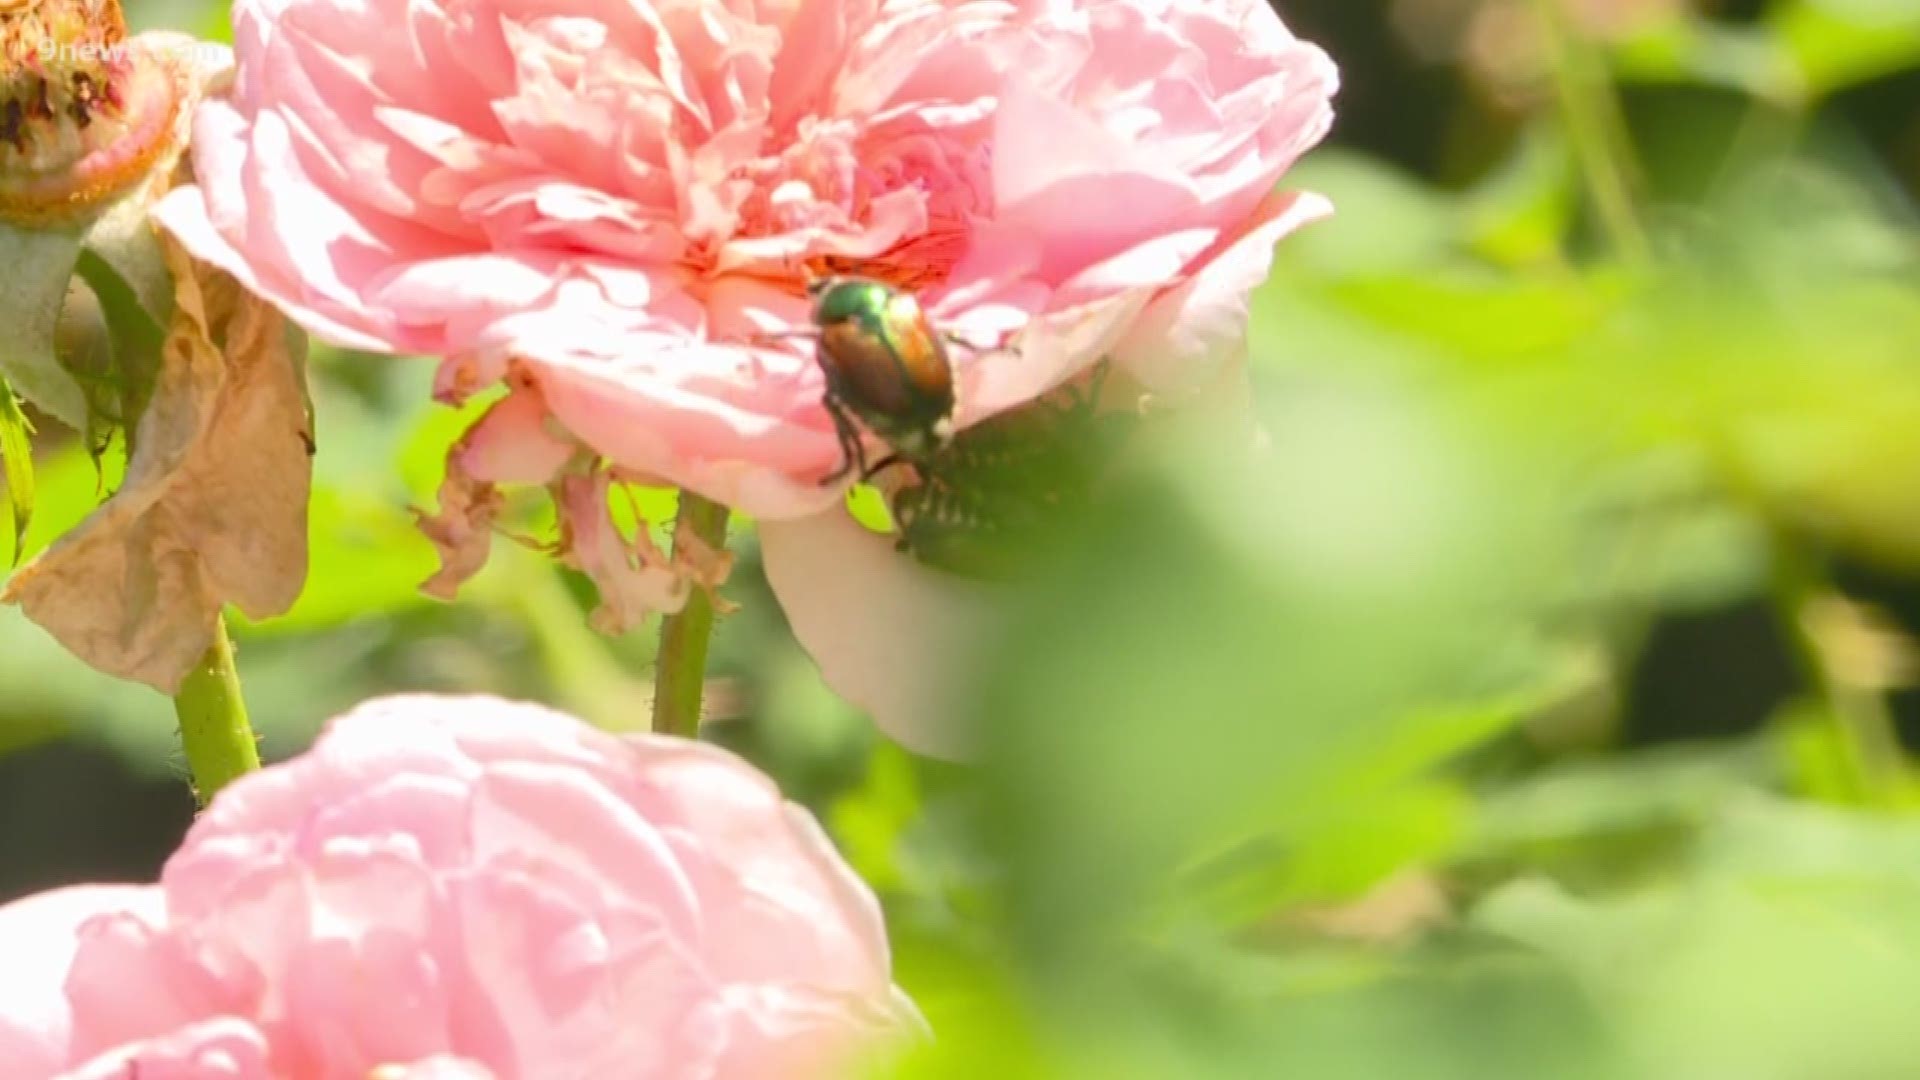 For some gardeners, Japanese beetles have likely become a fact of life. The non-native pest has established itself well in Denver, returning every summer to destroy roses and other plants.